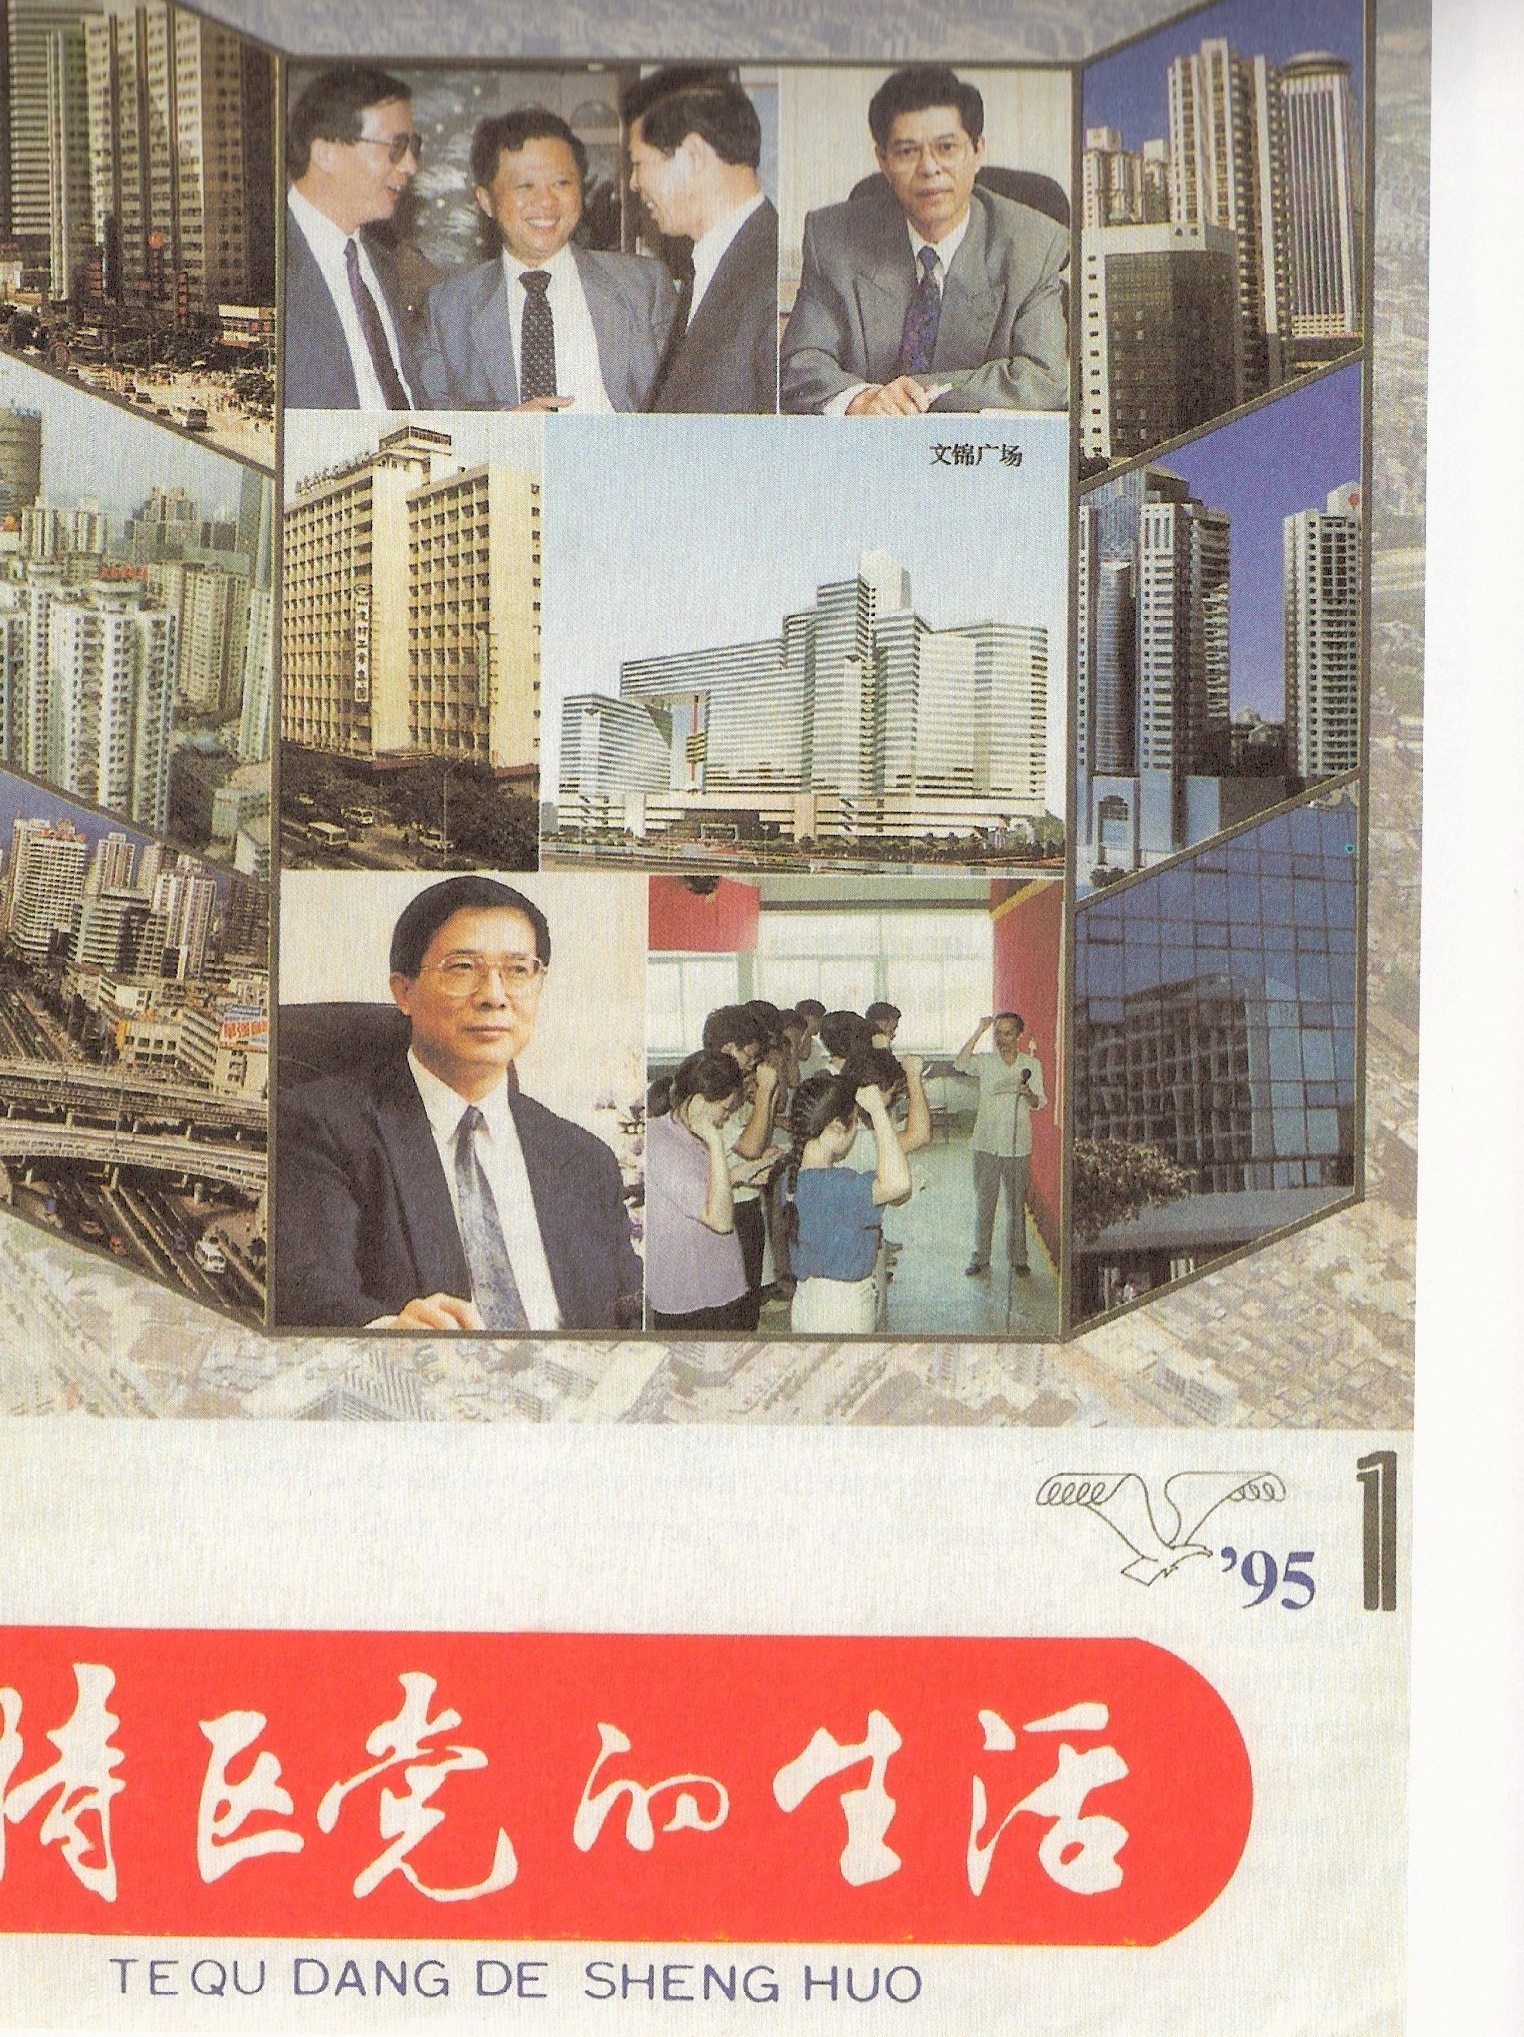 The Chinese Communist Party periodical for the Shenzhen Special Economic Zone (1995) from "Great Leap Forward", Harvard Design School 2001